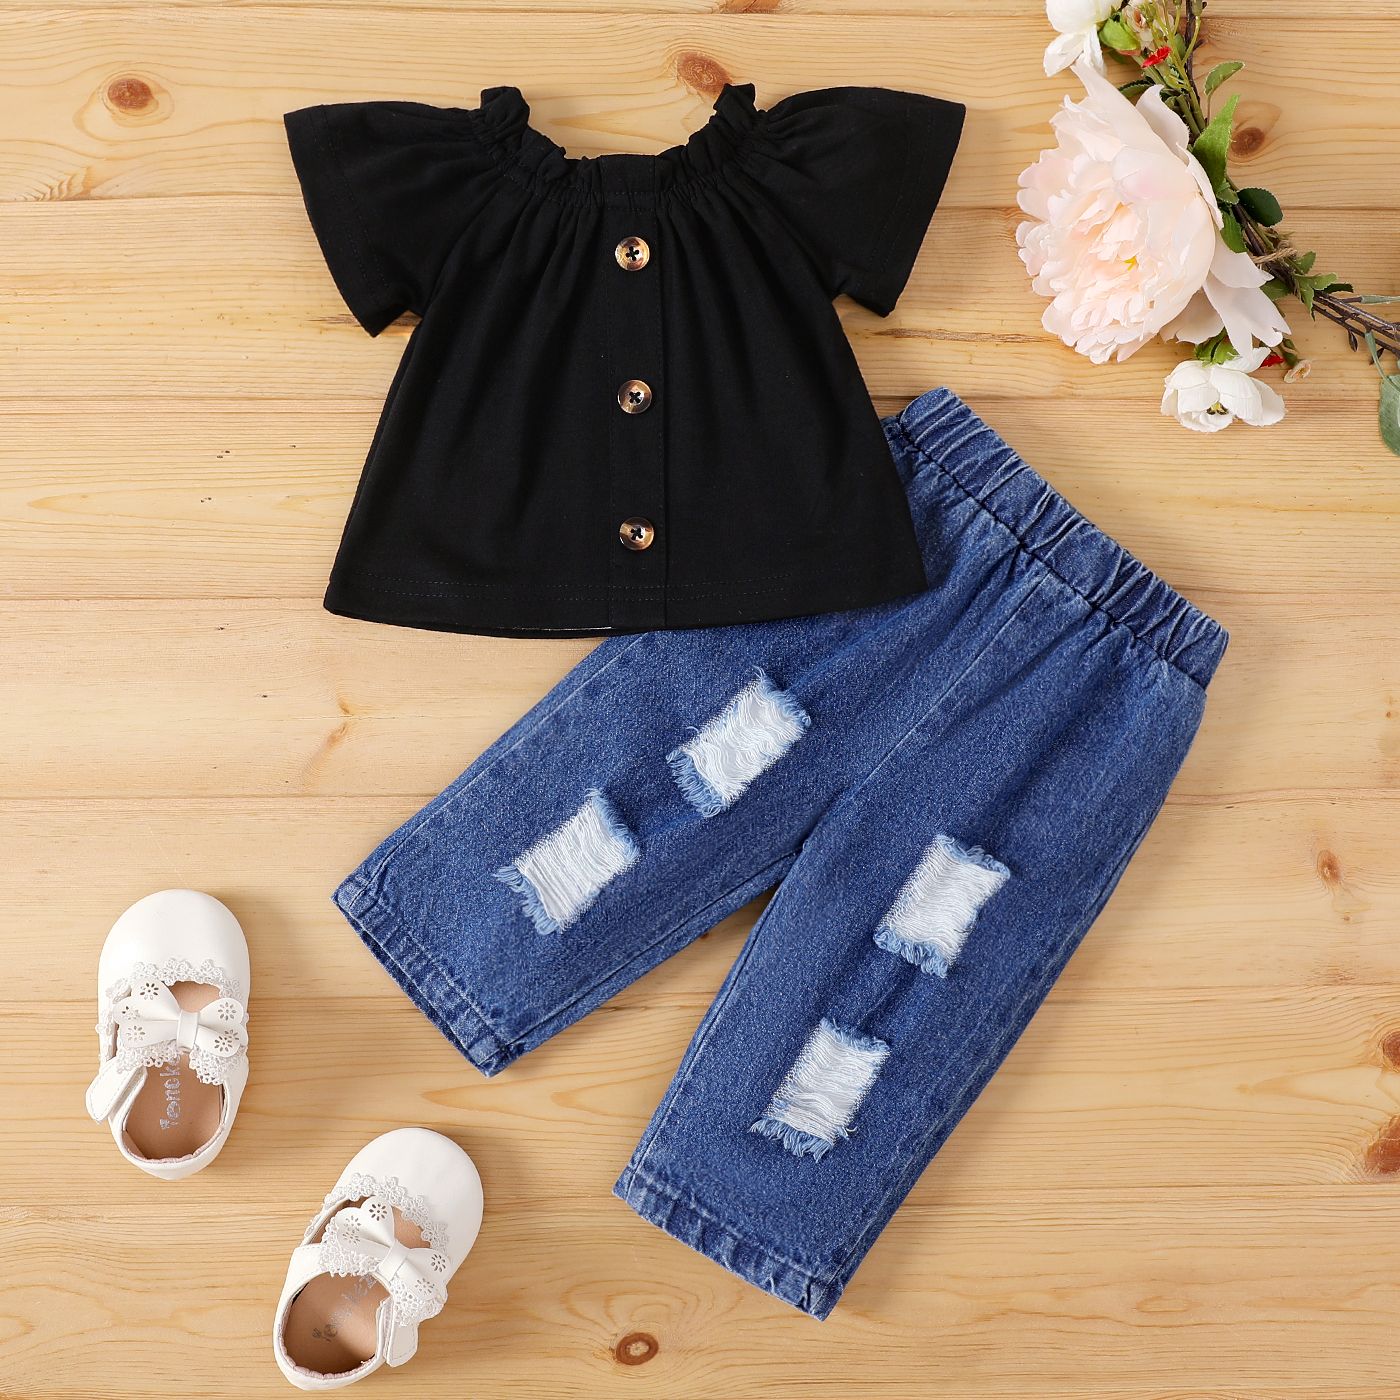 2pcs Baby Girl Ruffle Trim Short-sleeve Top and 100% Cotton Ripped Jeans Set